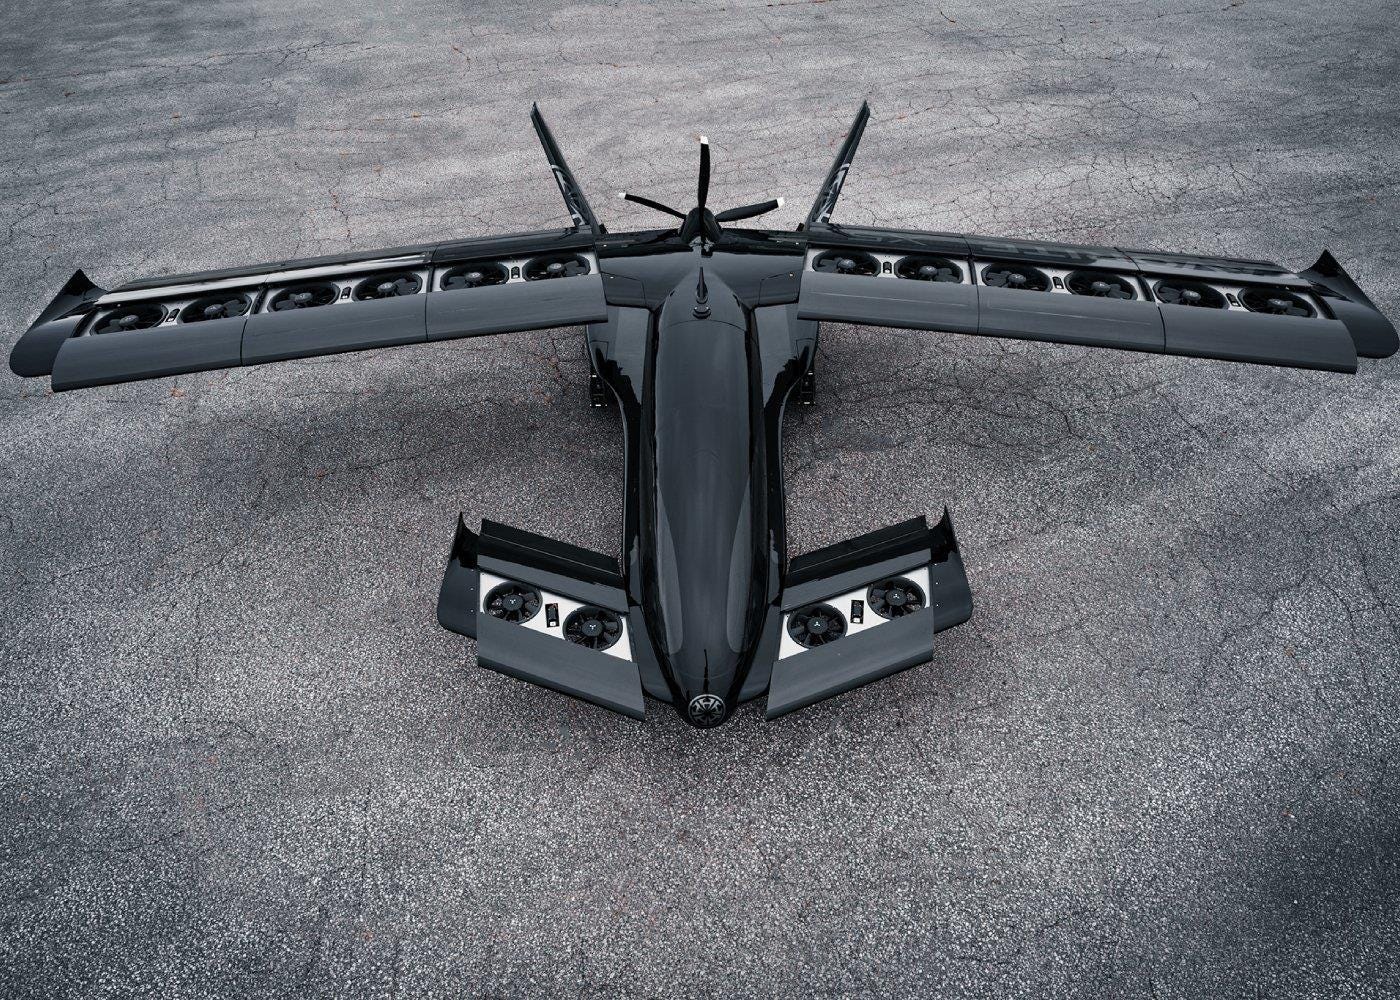 Air taxi developer Horizon embarks on path to become publicly traded | News  | Flight Global